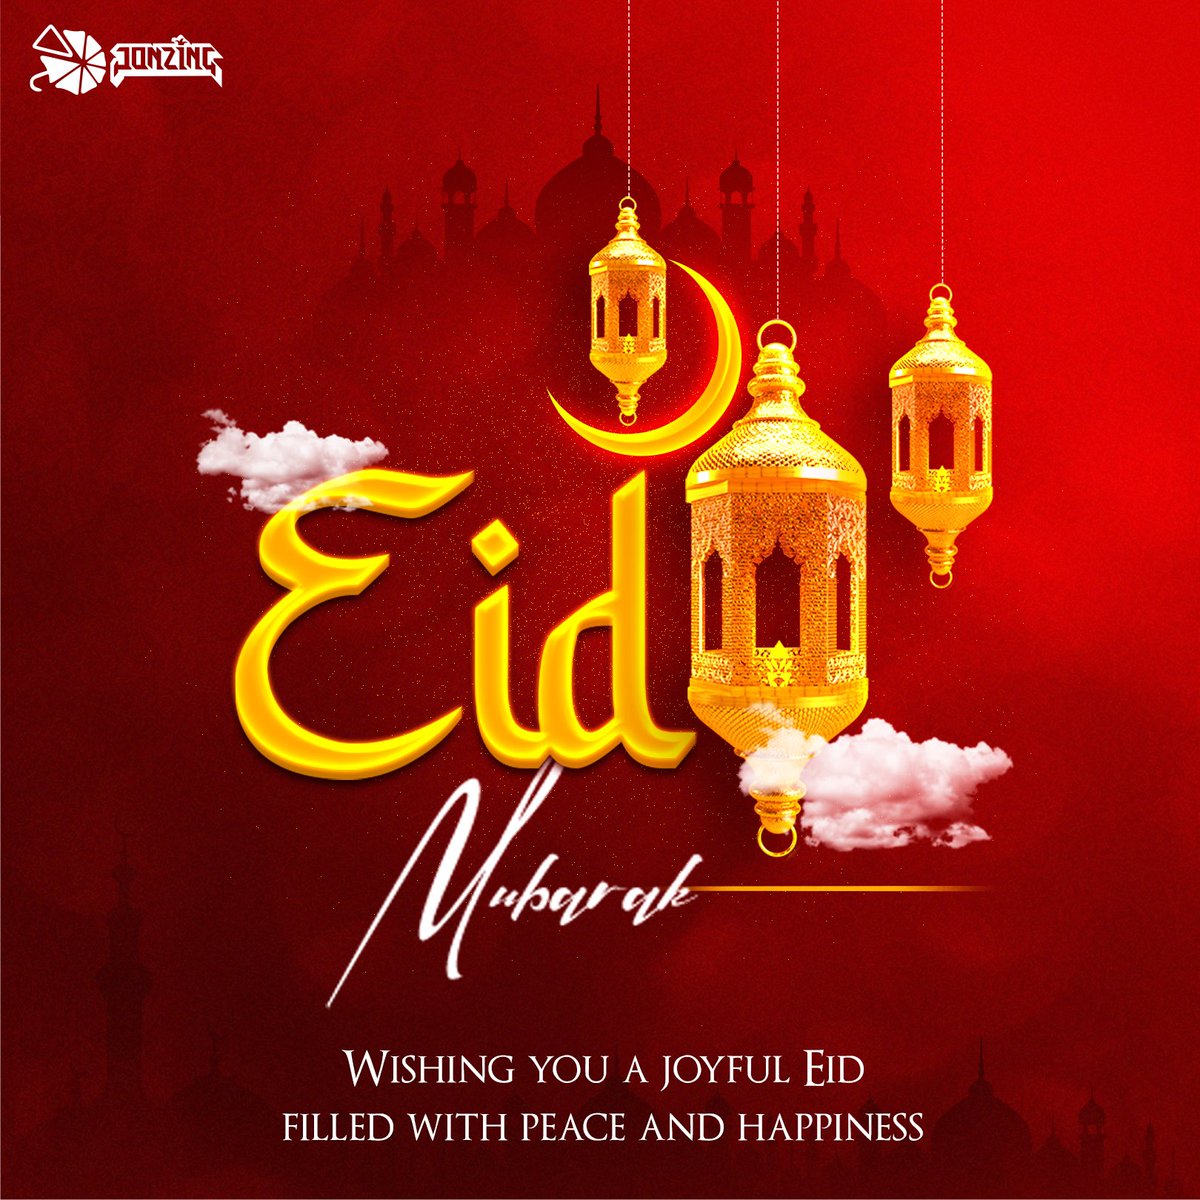 Sending heartfelt wishes to all our Muslim friends celebrating Eid Mubarak! May this special day bring you joy, peace, and blessings in abundance. 🌙✨ #EidMubarak